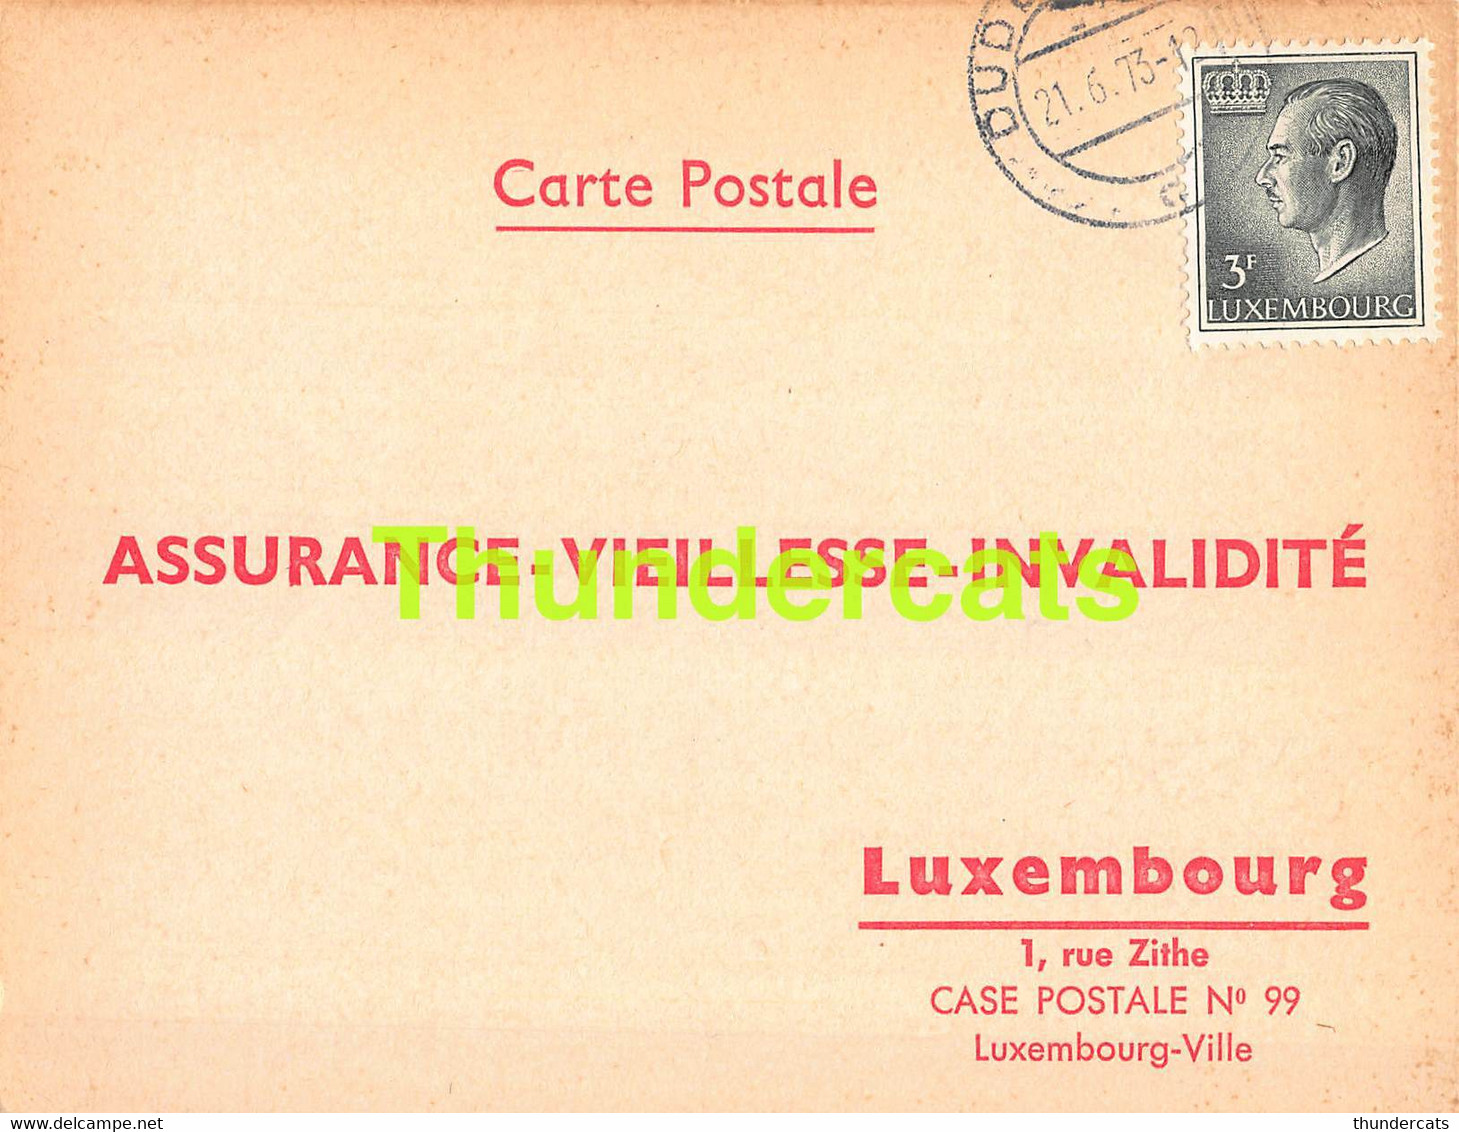 ASSURANCE VIEILLESSE INVALIDITE LUXEMBOURG 1973 DUDELANGE COPPENS - Covers & Documents